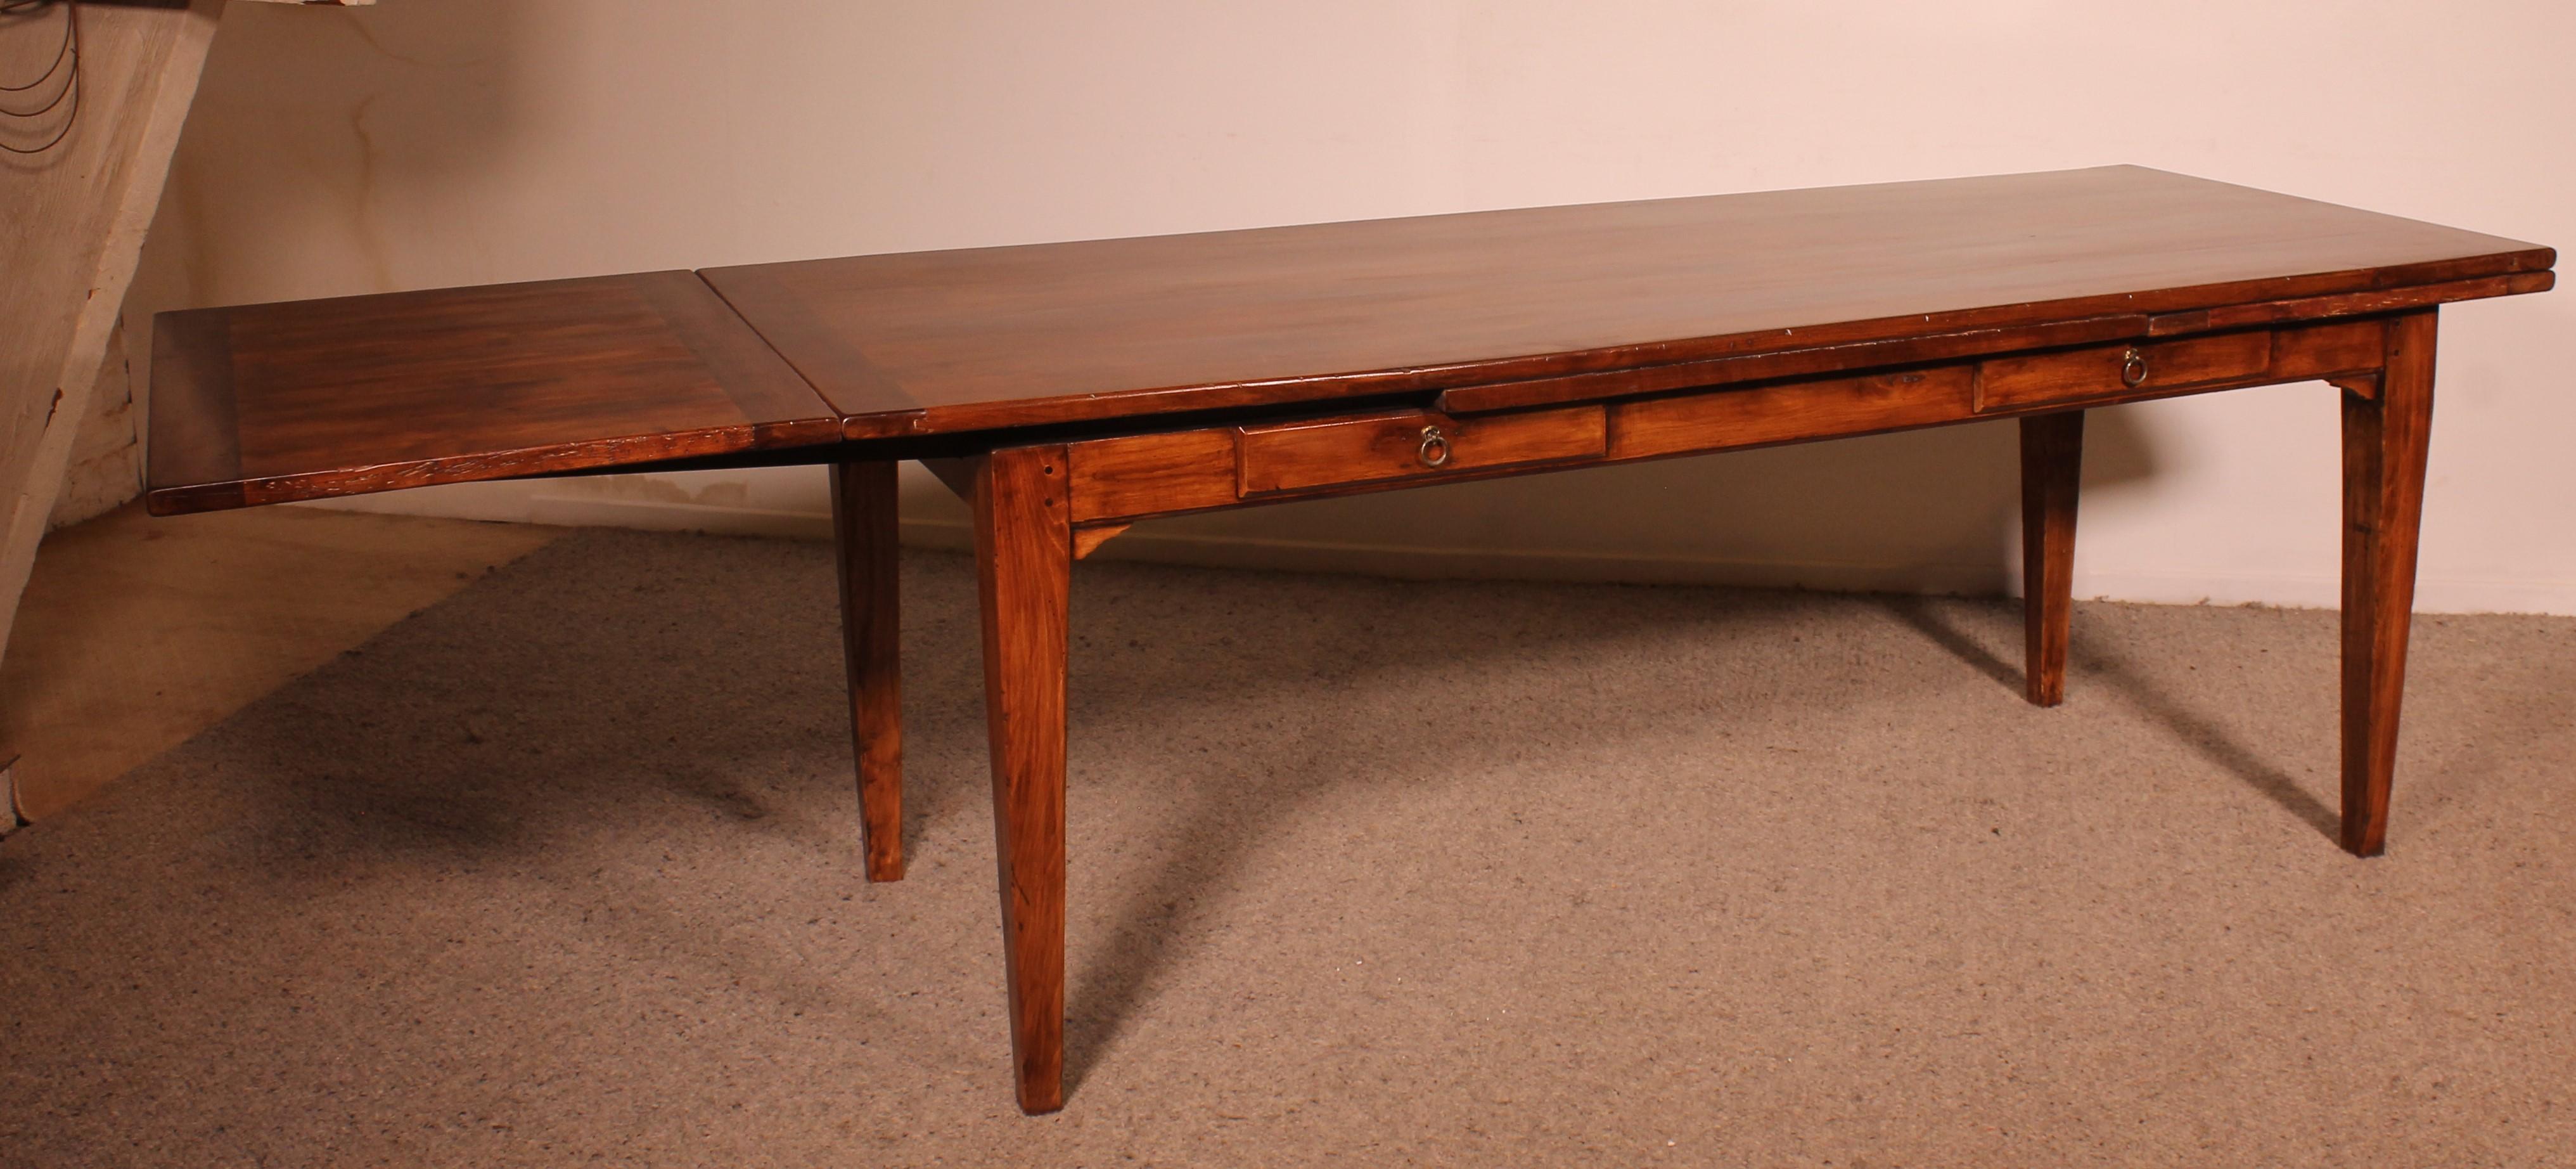 Extending Table In Cherrywood 19th Century-louis XVI Feet For Sale 4